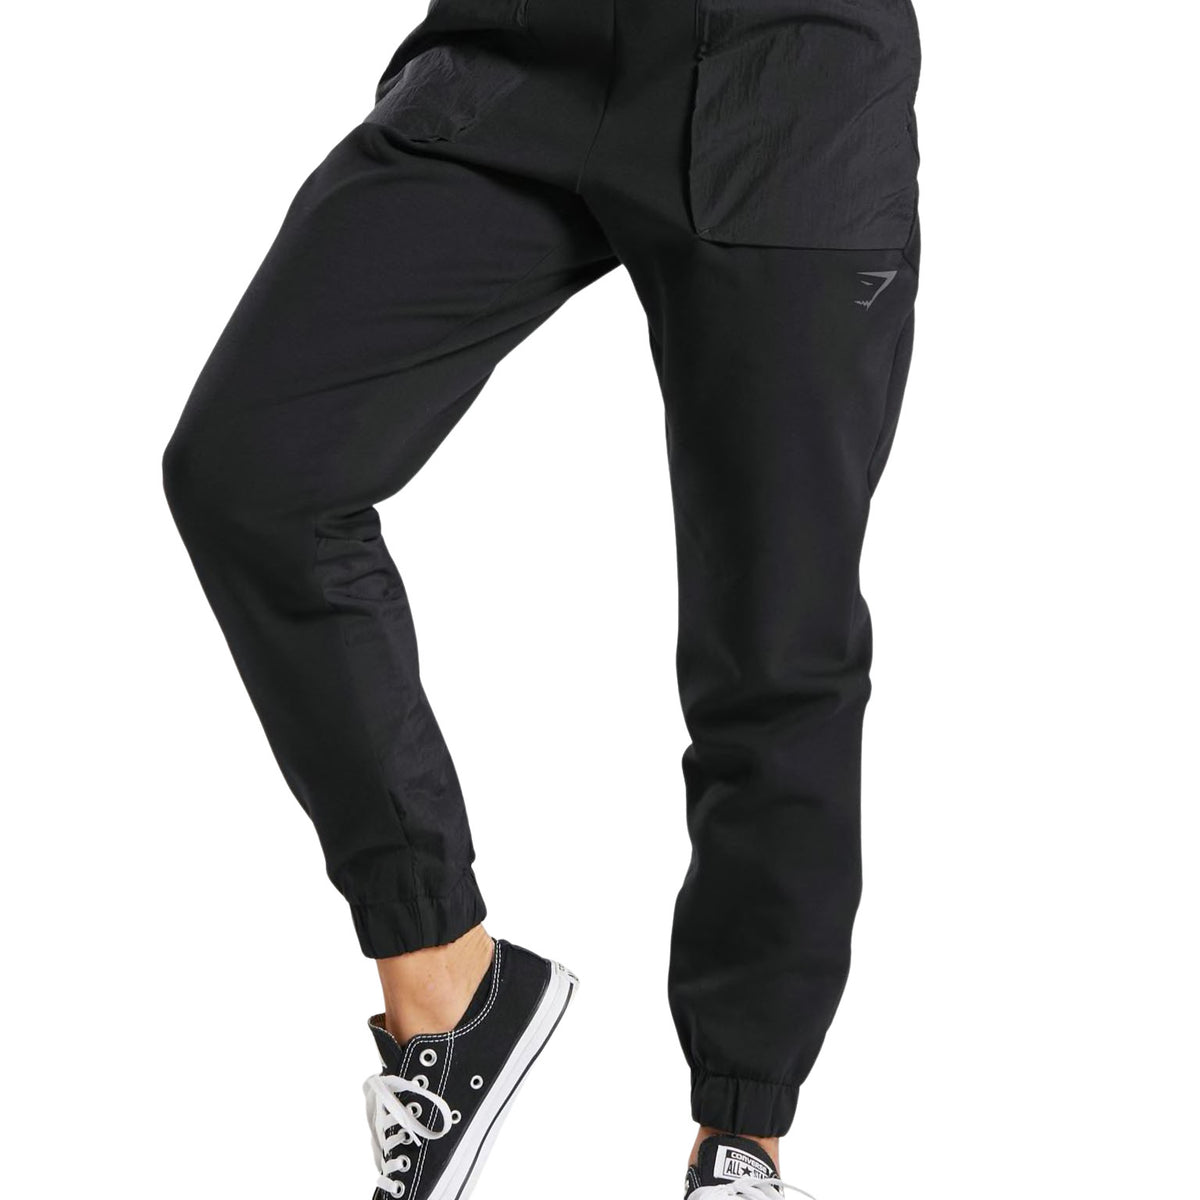 Gymshark Venture Joggers Black High Waisted pockets Women's Size Small S